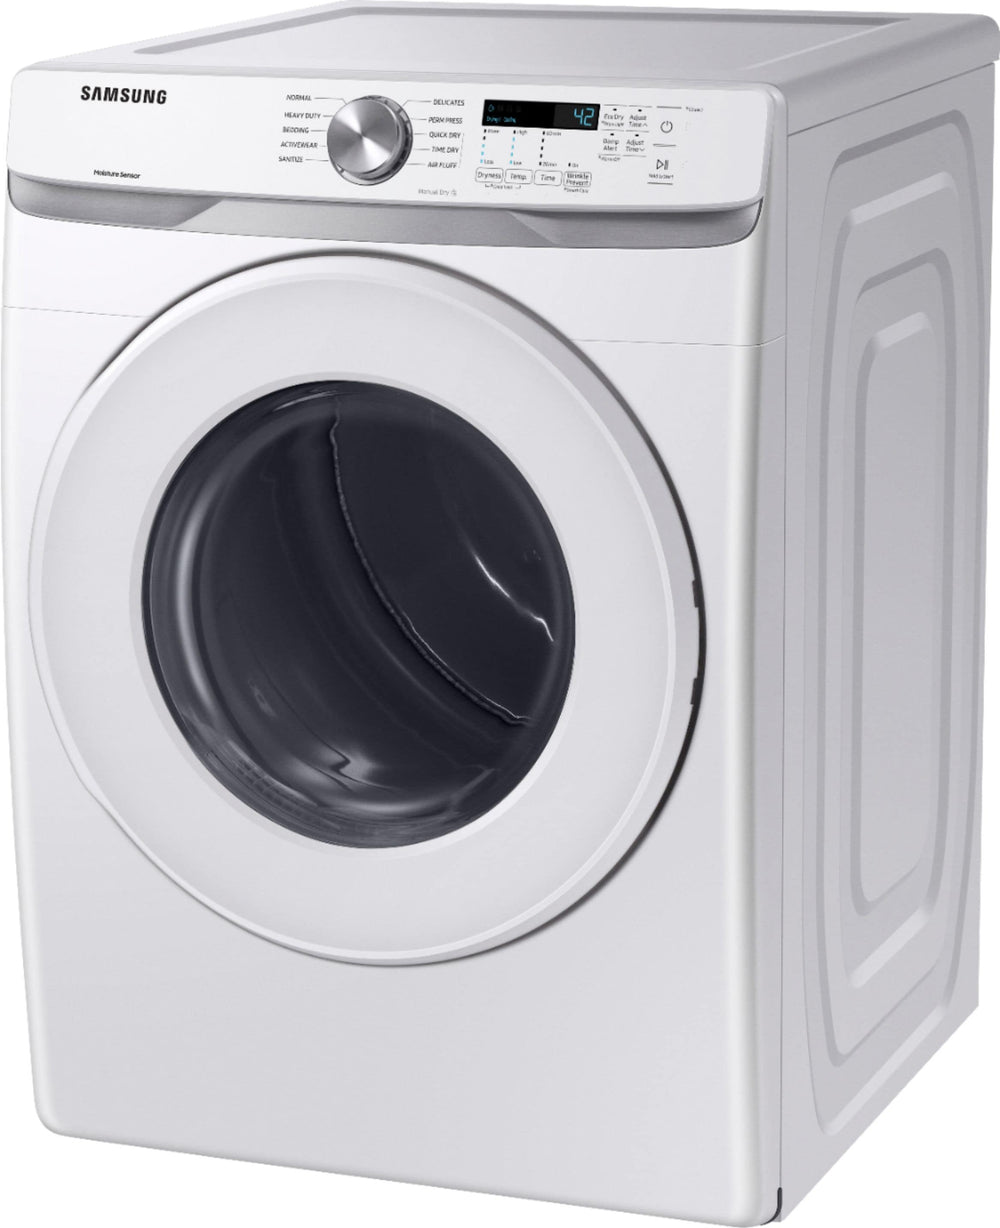 Samsung - 7.5 Cu. Ft. Stackable Electric Dryer with Sensor Dry - White_1